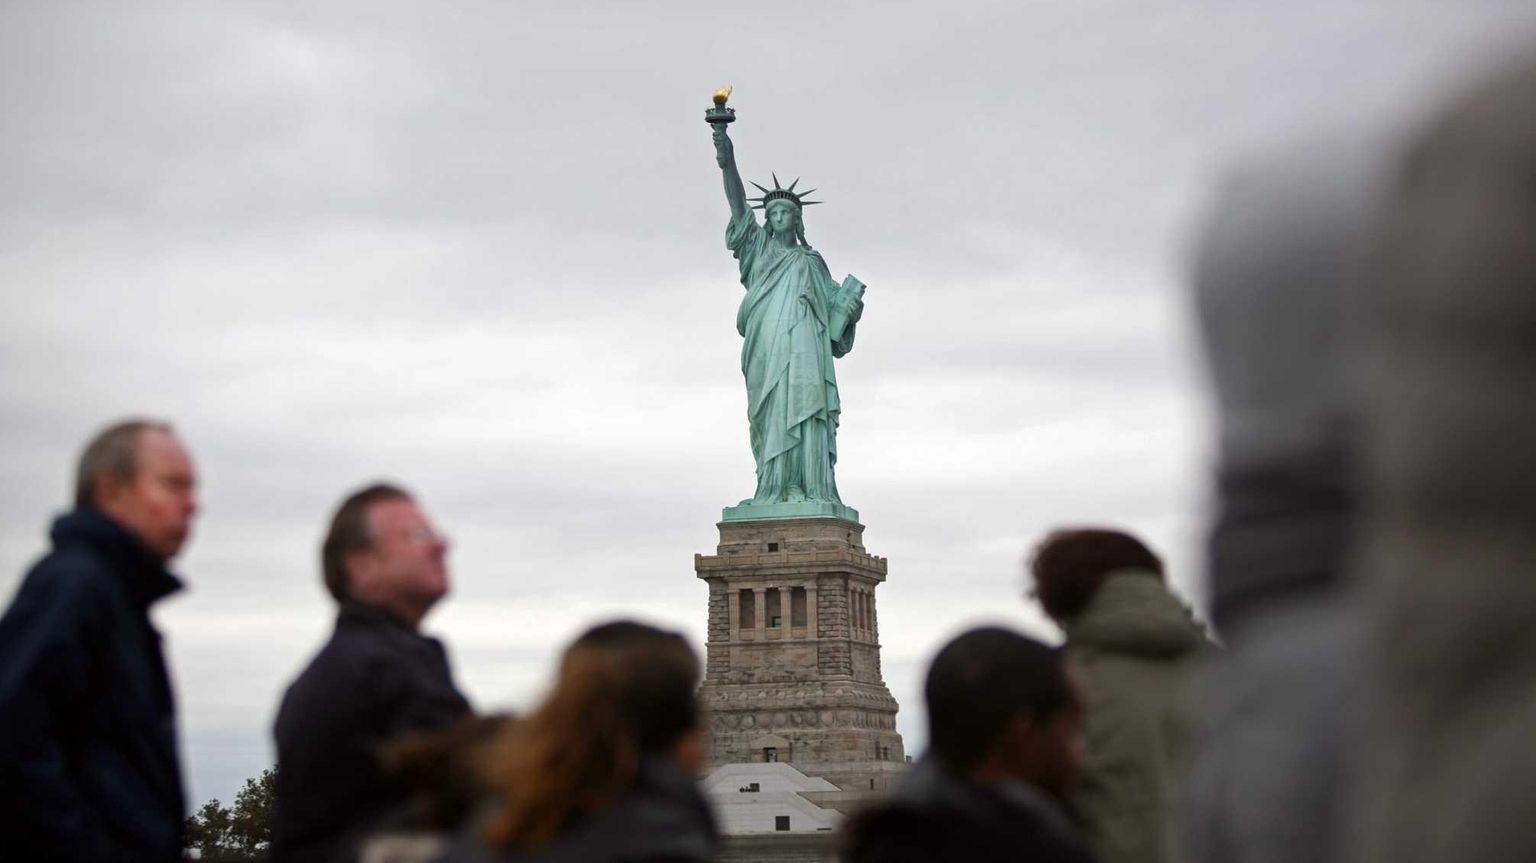 Why can't we go up the Statue of Liberty's torch?